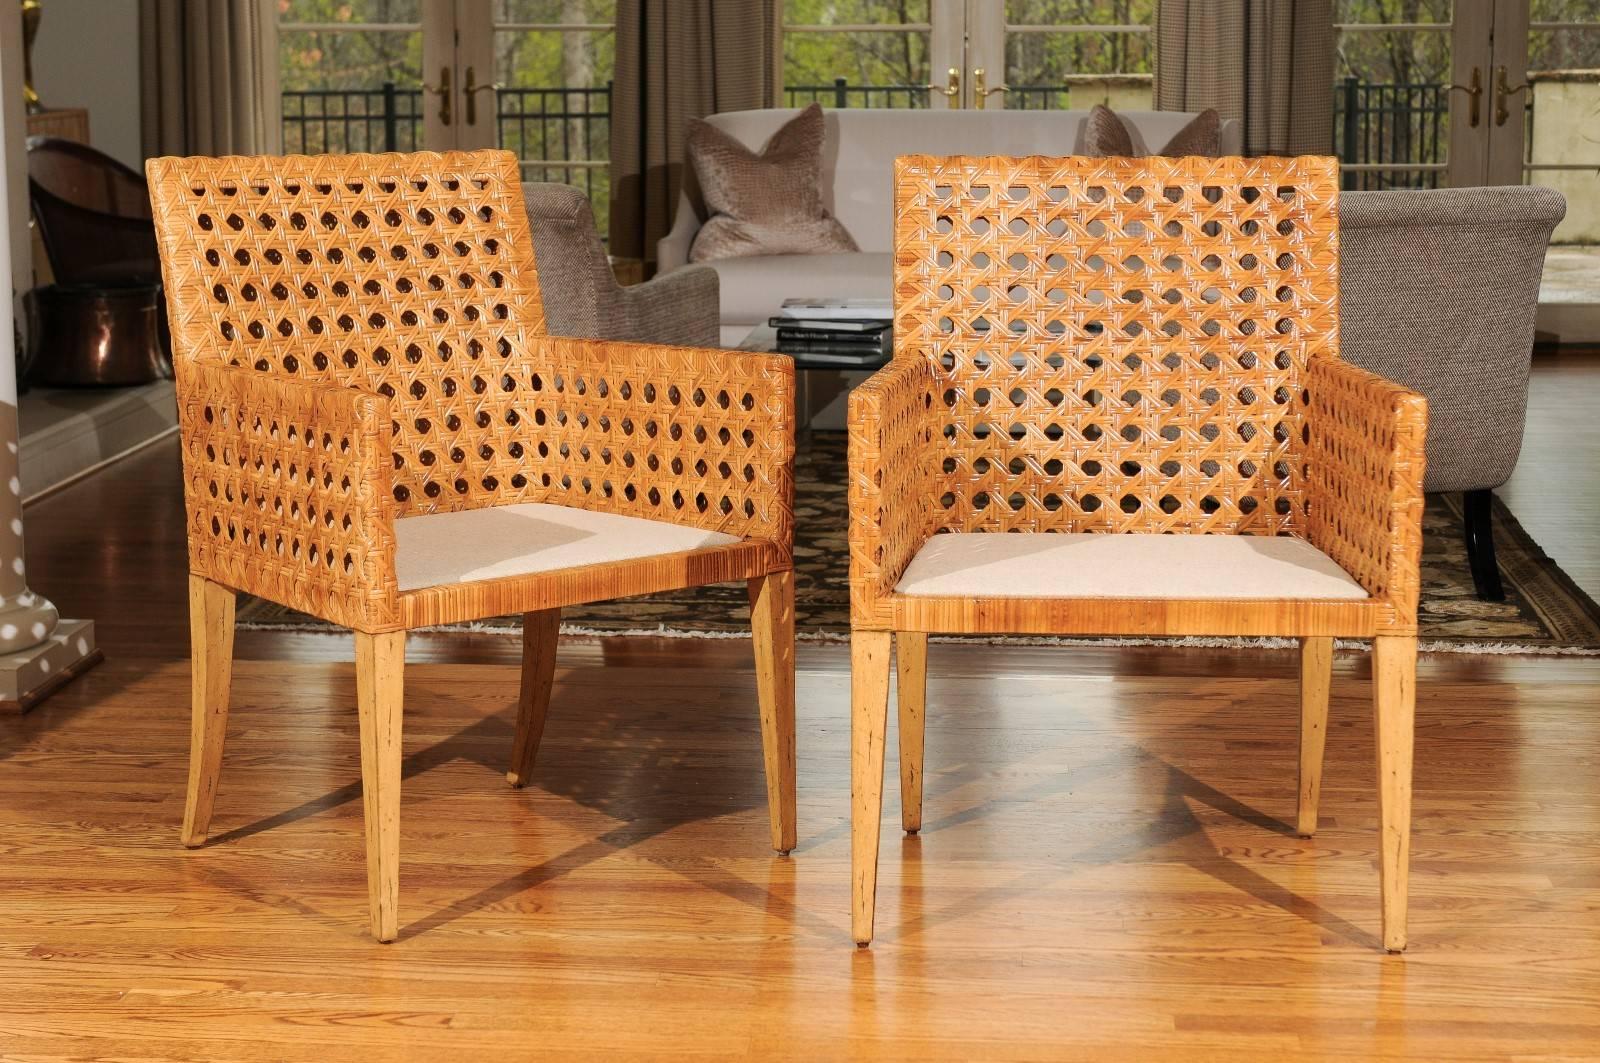 A exceptional pair large-scale arm or dining chairs, circa 1975. Stout hardwood frame construction painstakingly wrapped in double-sided cane. Fabulous quality and detail. Aged to absolute perfection. Exquisite jewelry! Excellent restored condition.